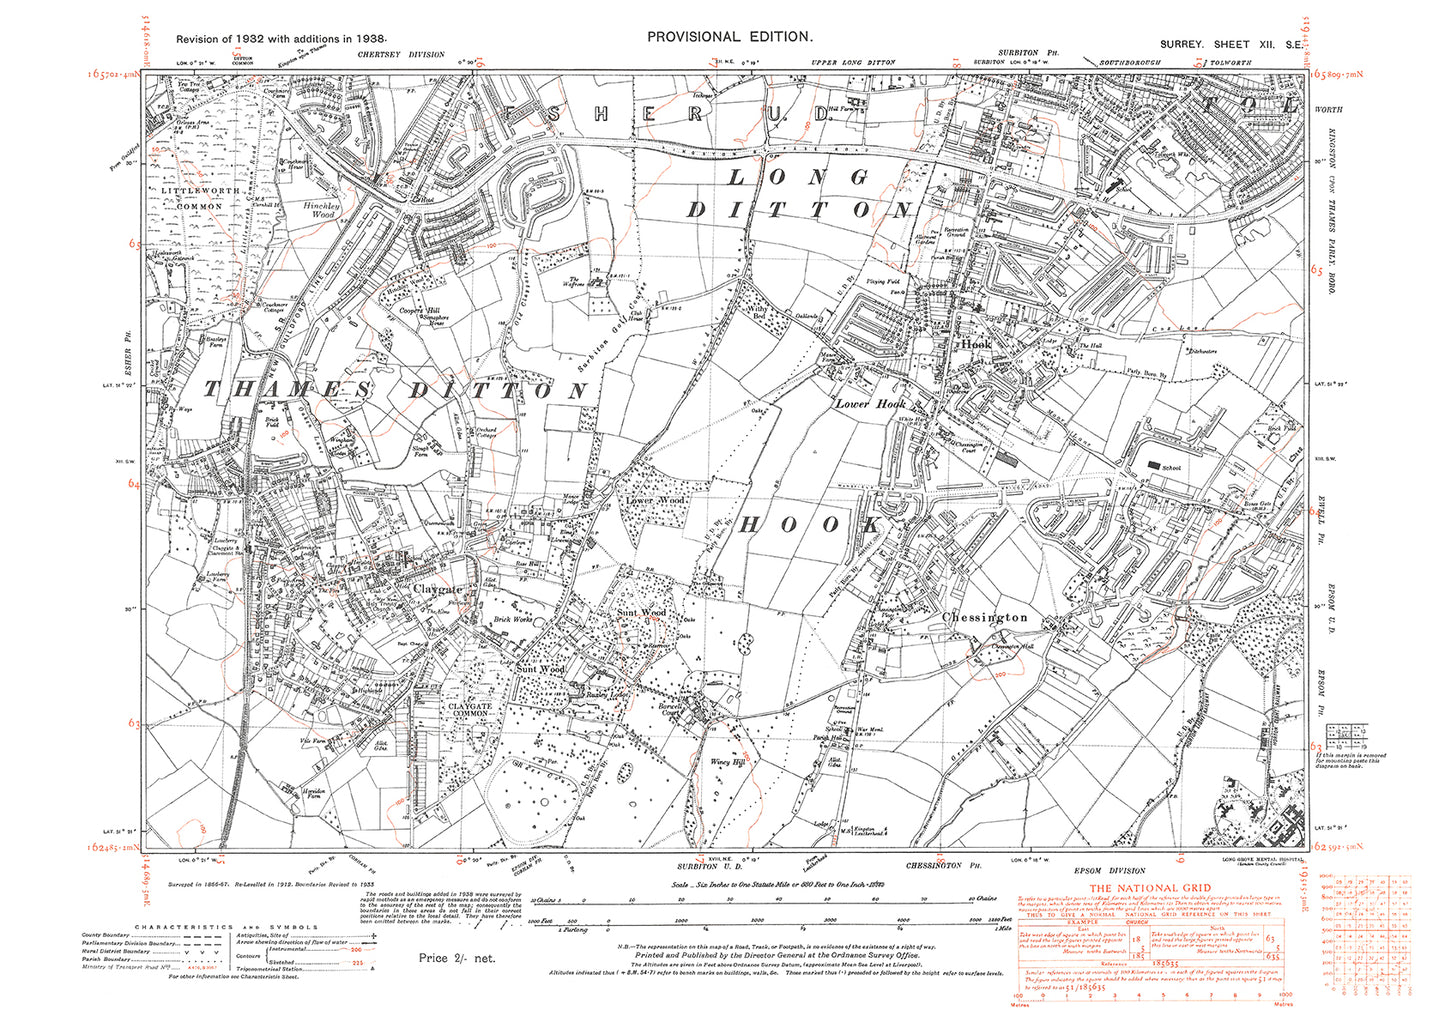 Thames Ditton, Long Ditton, Hook, Chessington, Claygate old map Surrey 1938: 12SE